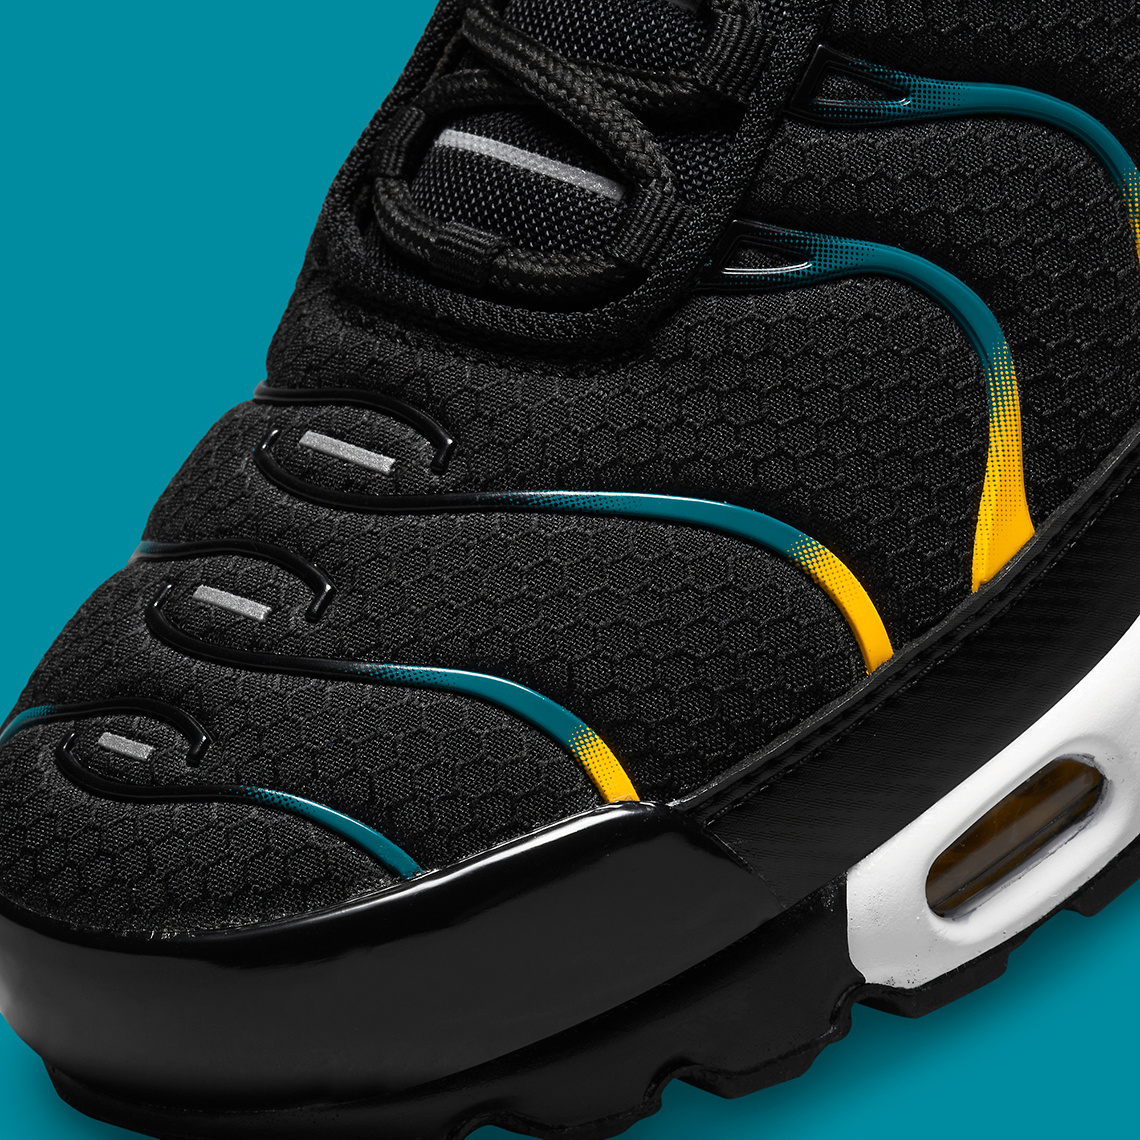 Nike Air Max Plus Yellow Teal DH4776-001 Release Info | SneakerNews.com